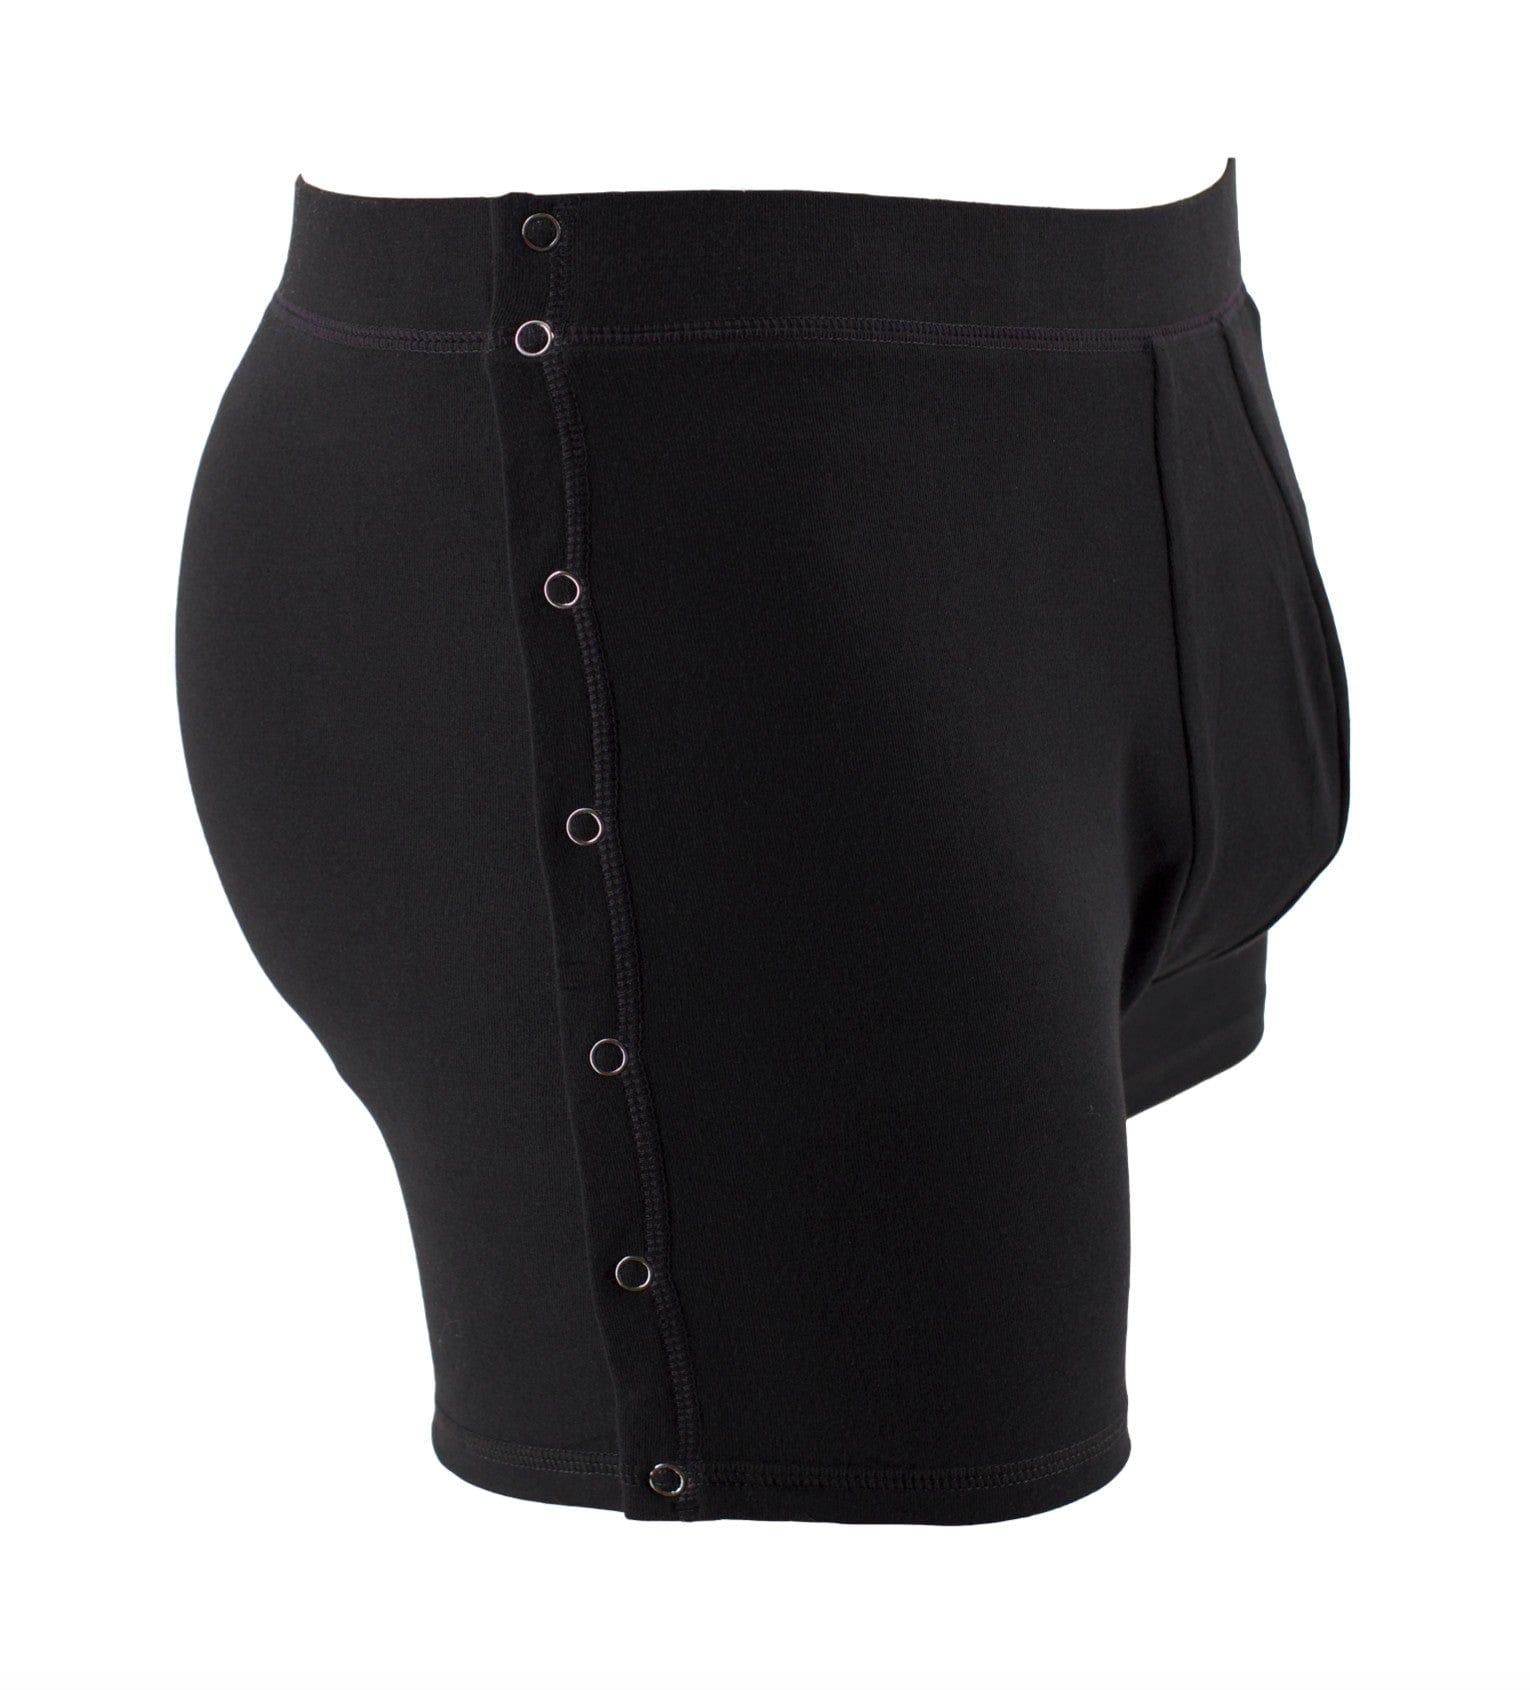 Post Surgery Tearaway Shorts - Men's & Women's - Unisex Recovery Tear Away  Shorts (Black, Small) at  Men's Clothing store